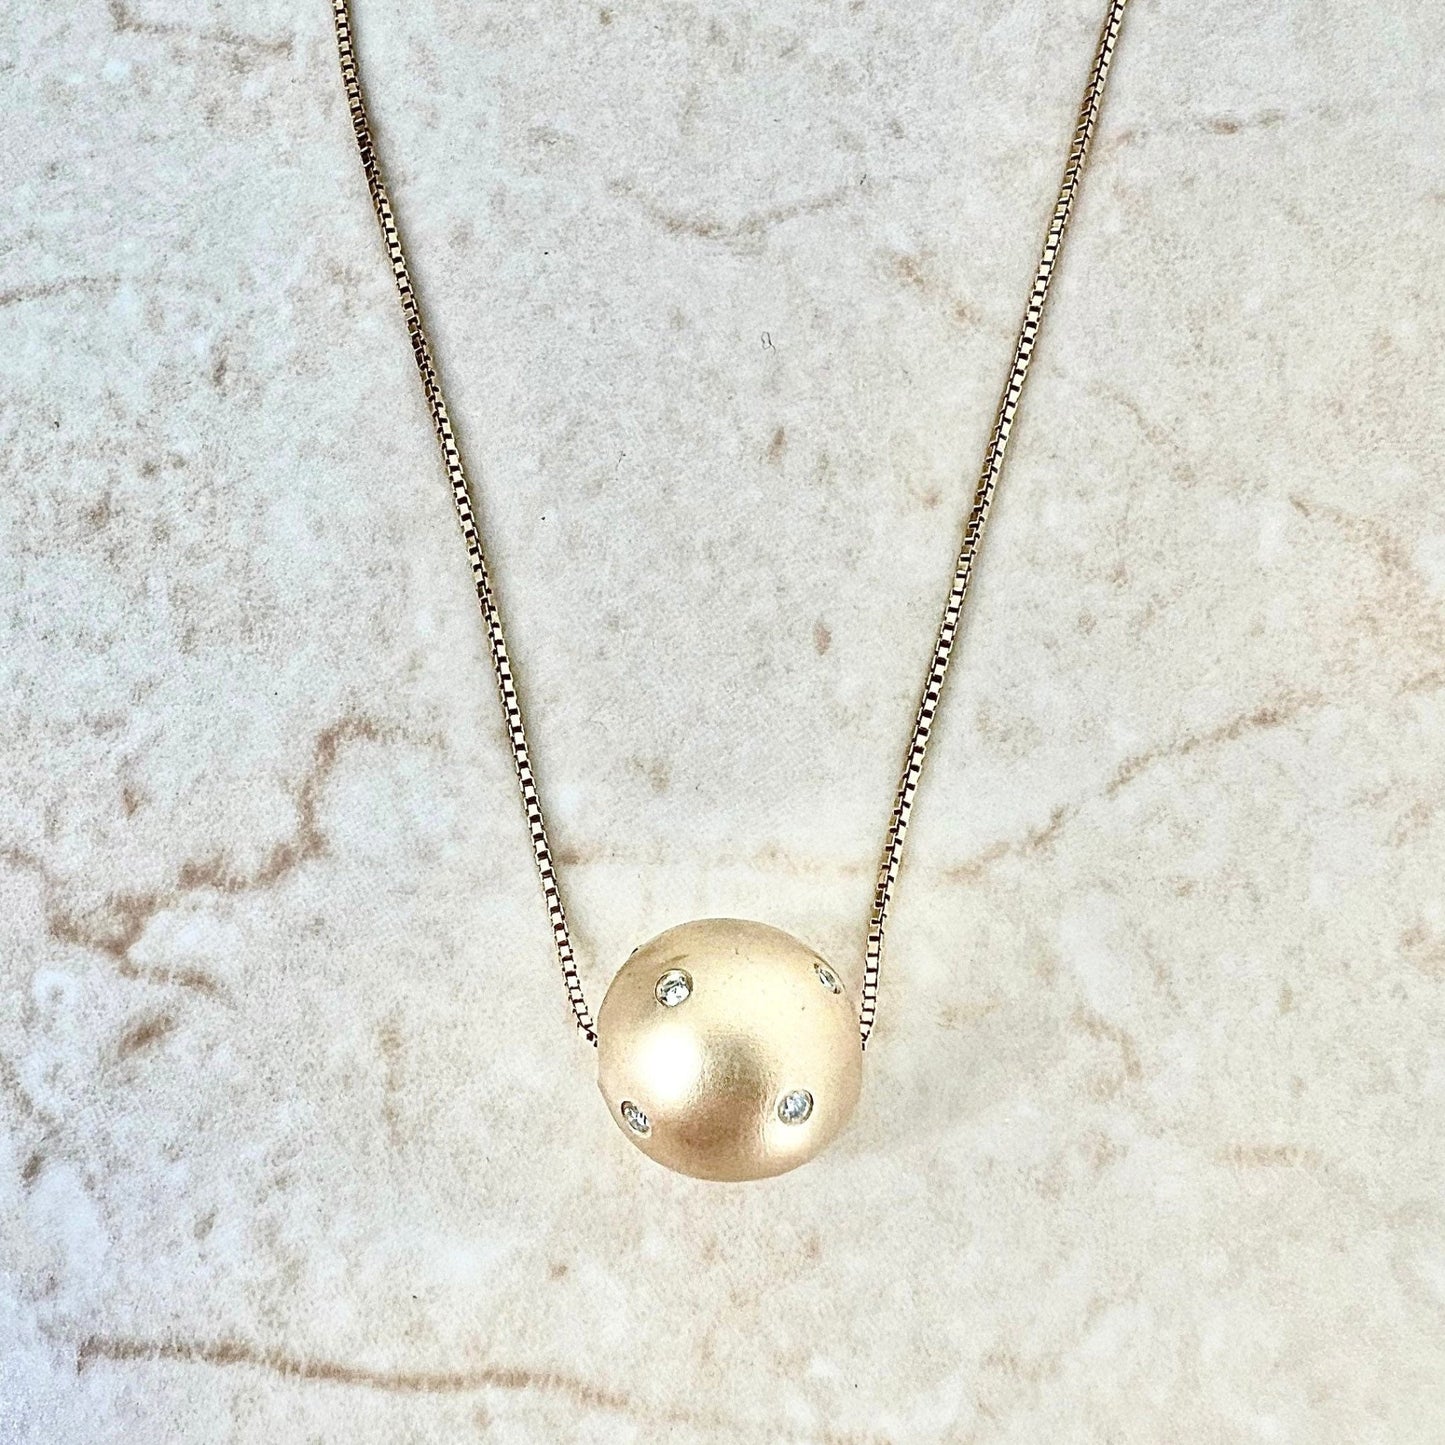 14K Diamond Sphere Pendant Necklace - Yellow Gold Pendant - Diamond Necklace - Gold Slide Pendant - Gold Ball Pendant - Best Gift For Her